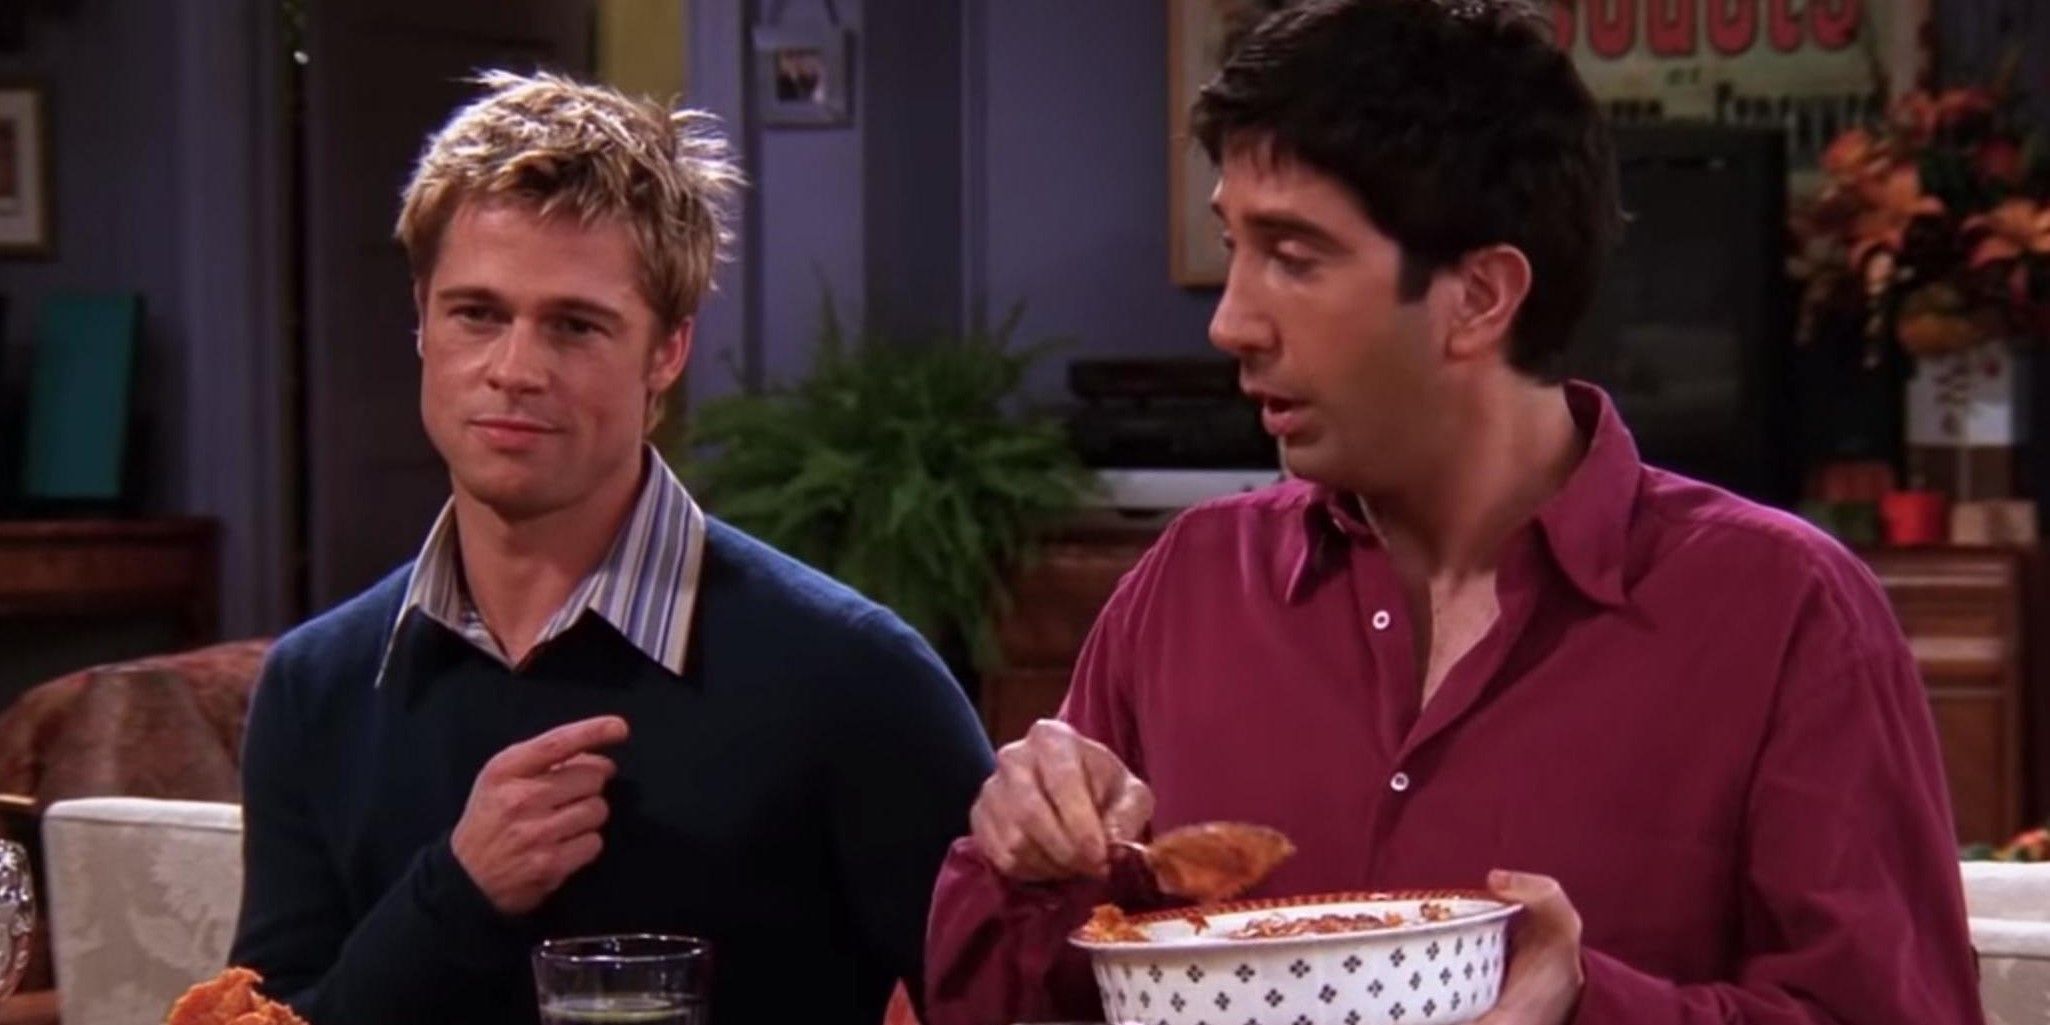 Will and Ross talk during thanksgiving in Friends.